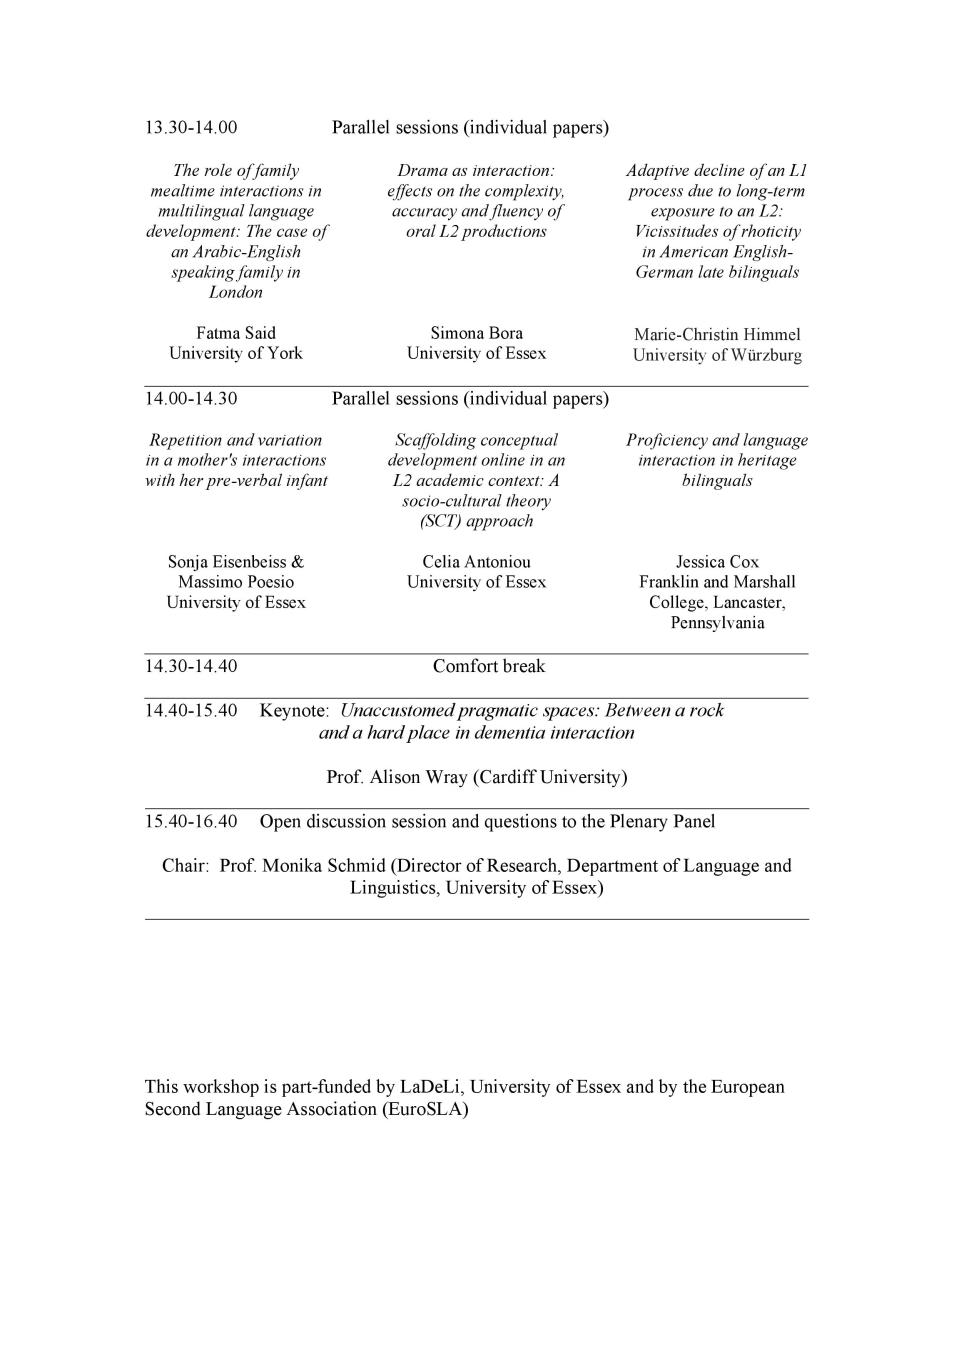 LaDeLi_Interaction_Workshop_2016_Final_Programme-page-002